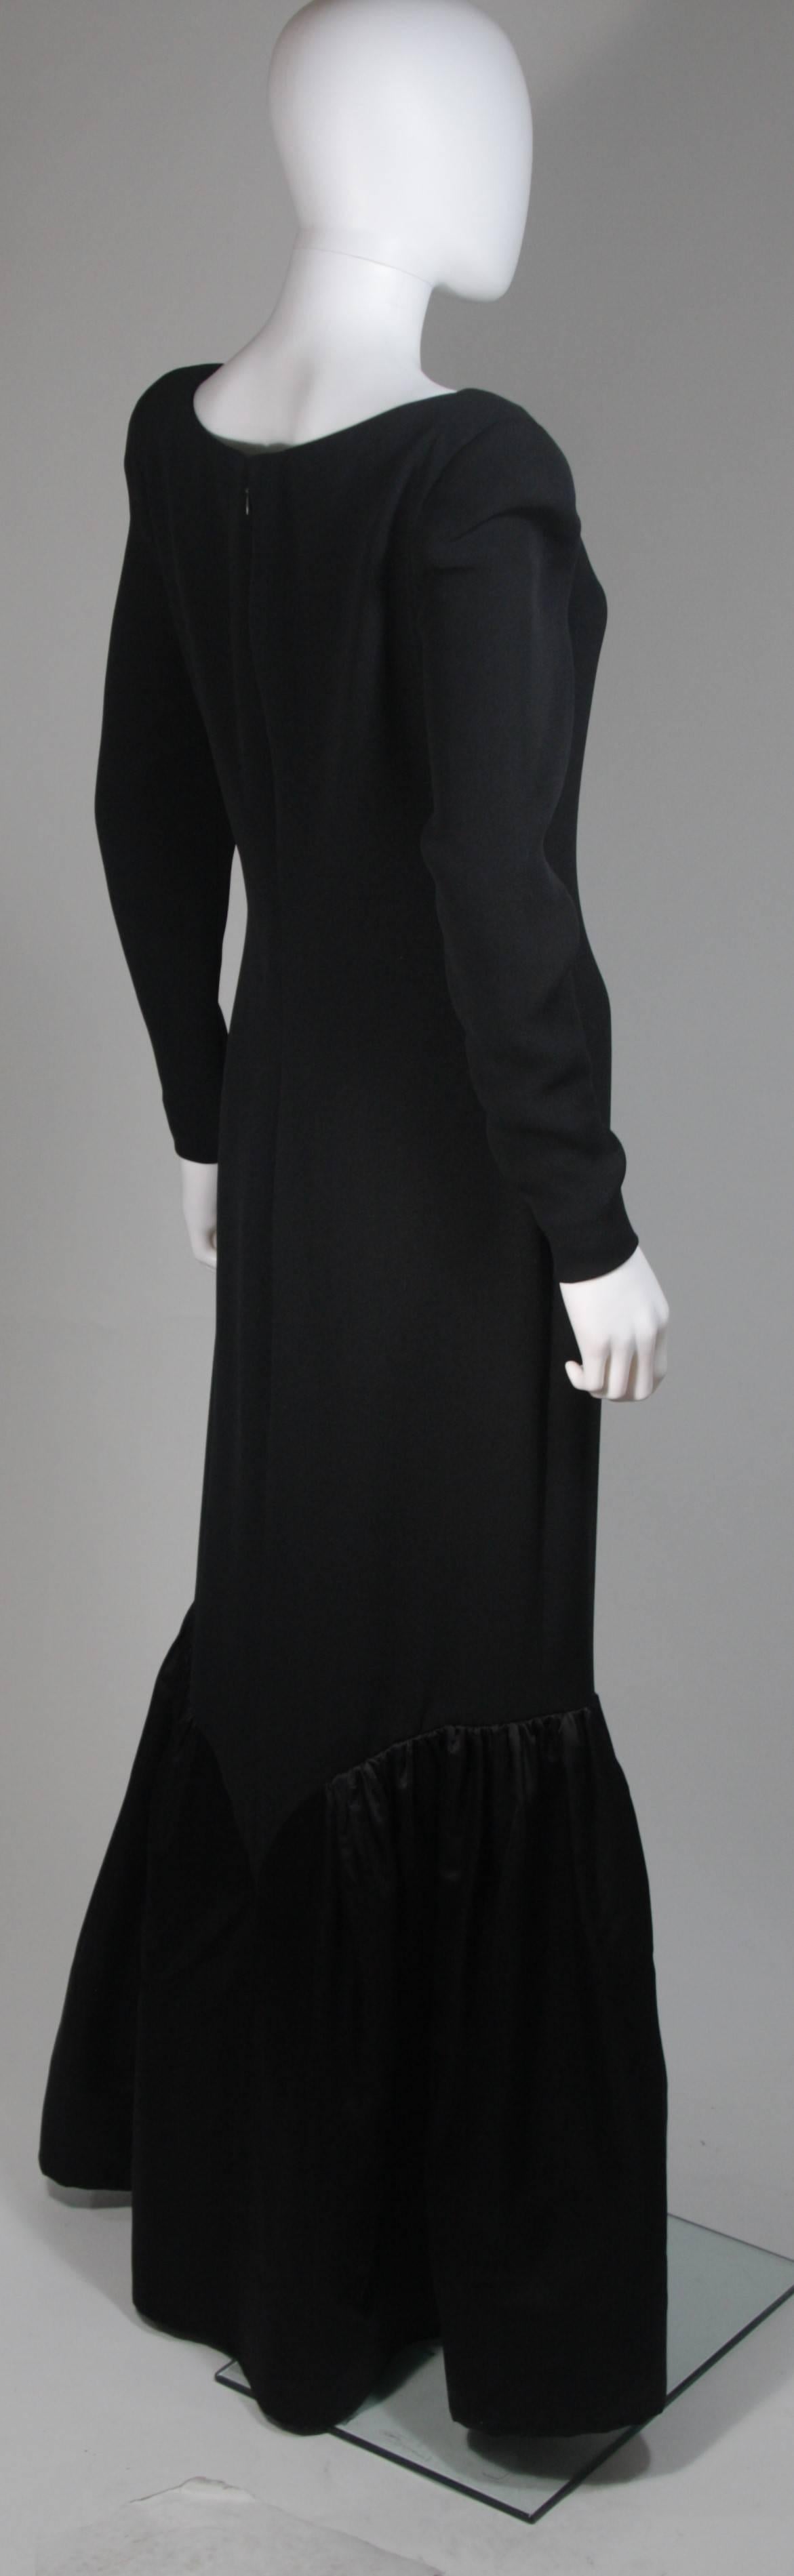 Bill Blass Black Long Sleeve Silk Gown with Gathered Satin Hem Size 8-10 For Sale 2